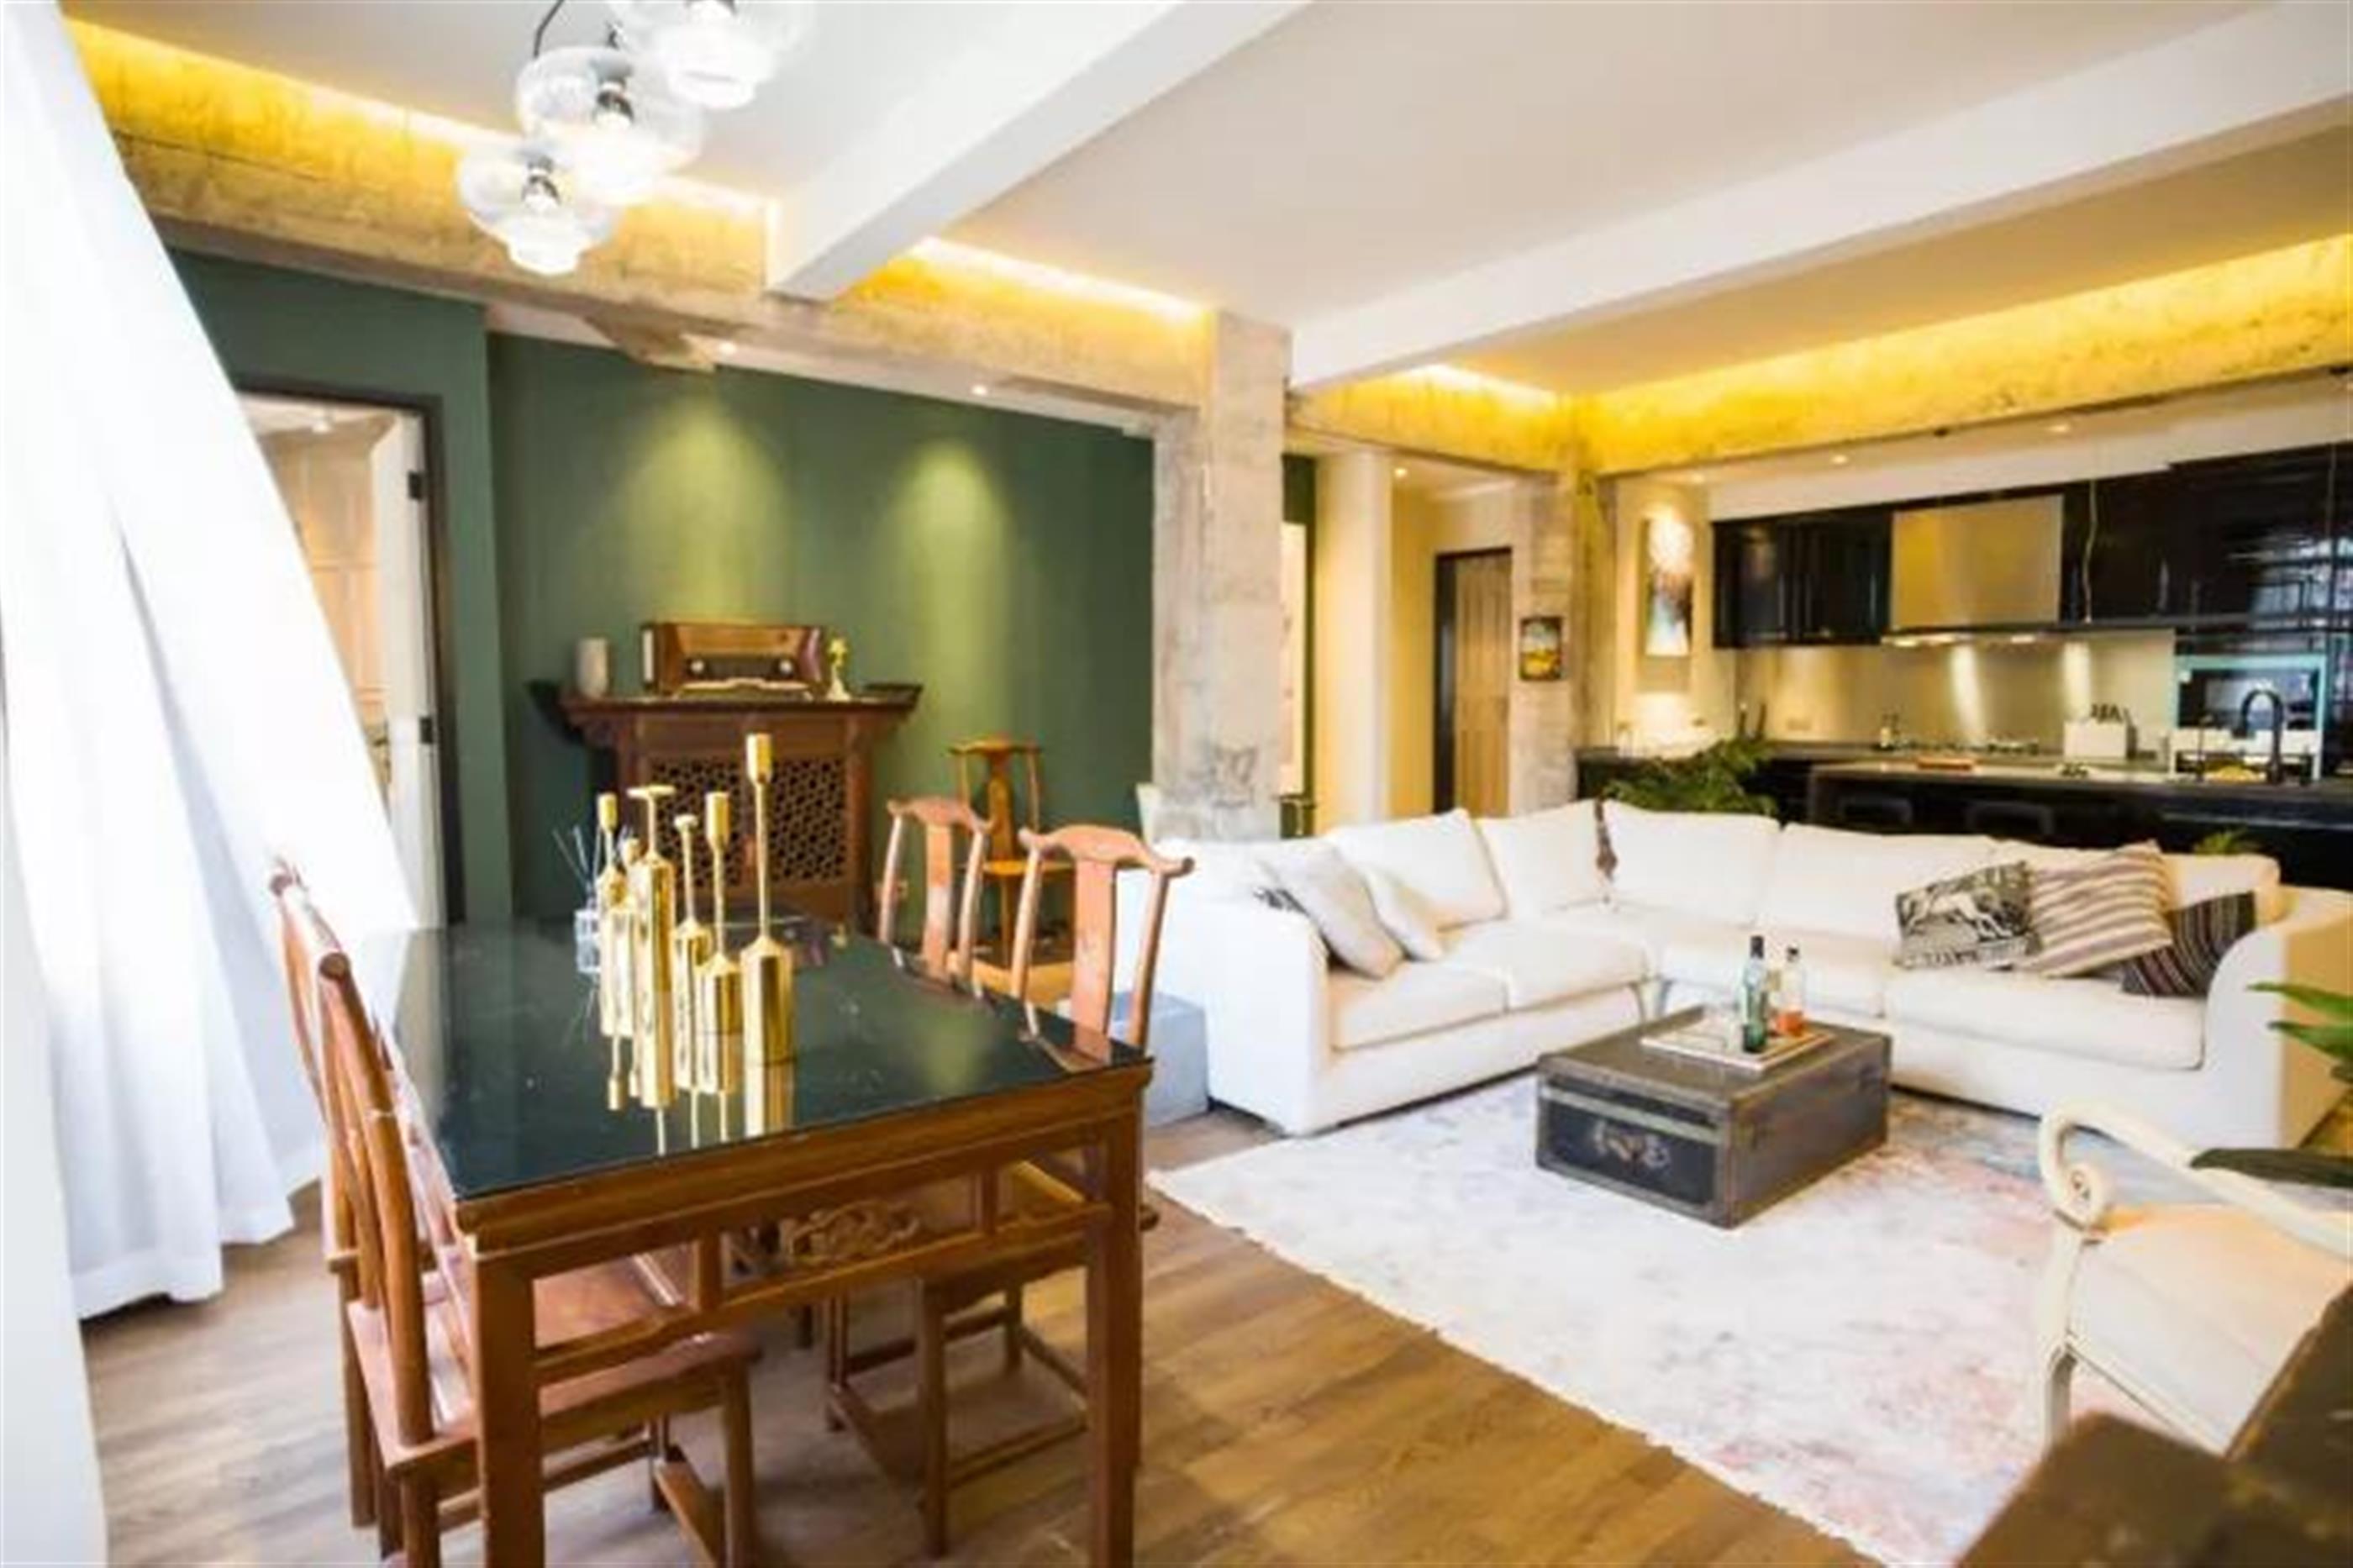 big couch Historic High-Quality 4BR Lane House Apartment nr LN 2/12/13 for Rent in Shanghai